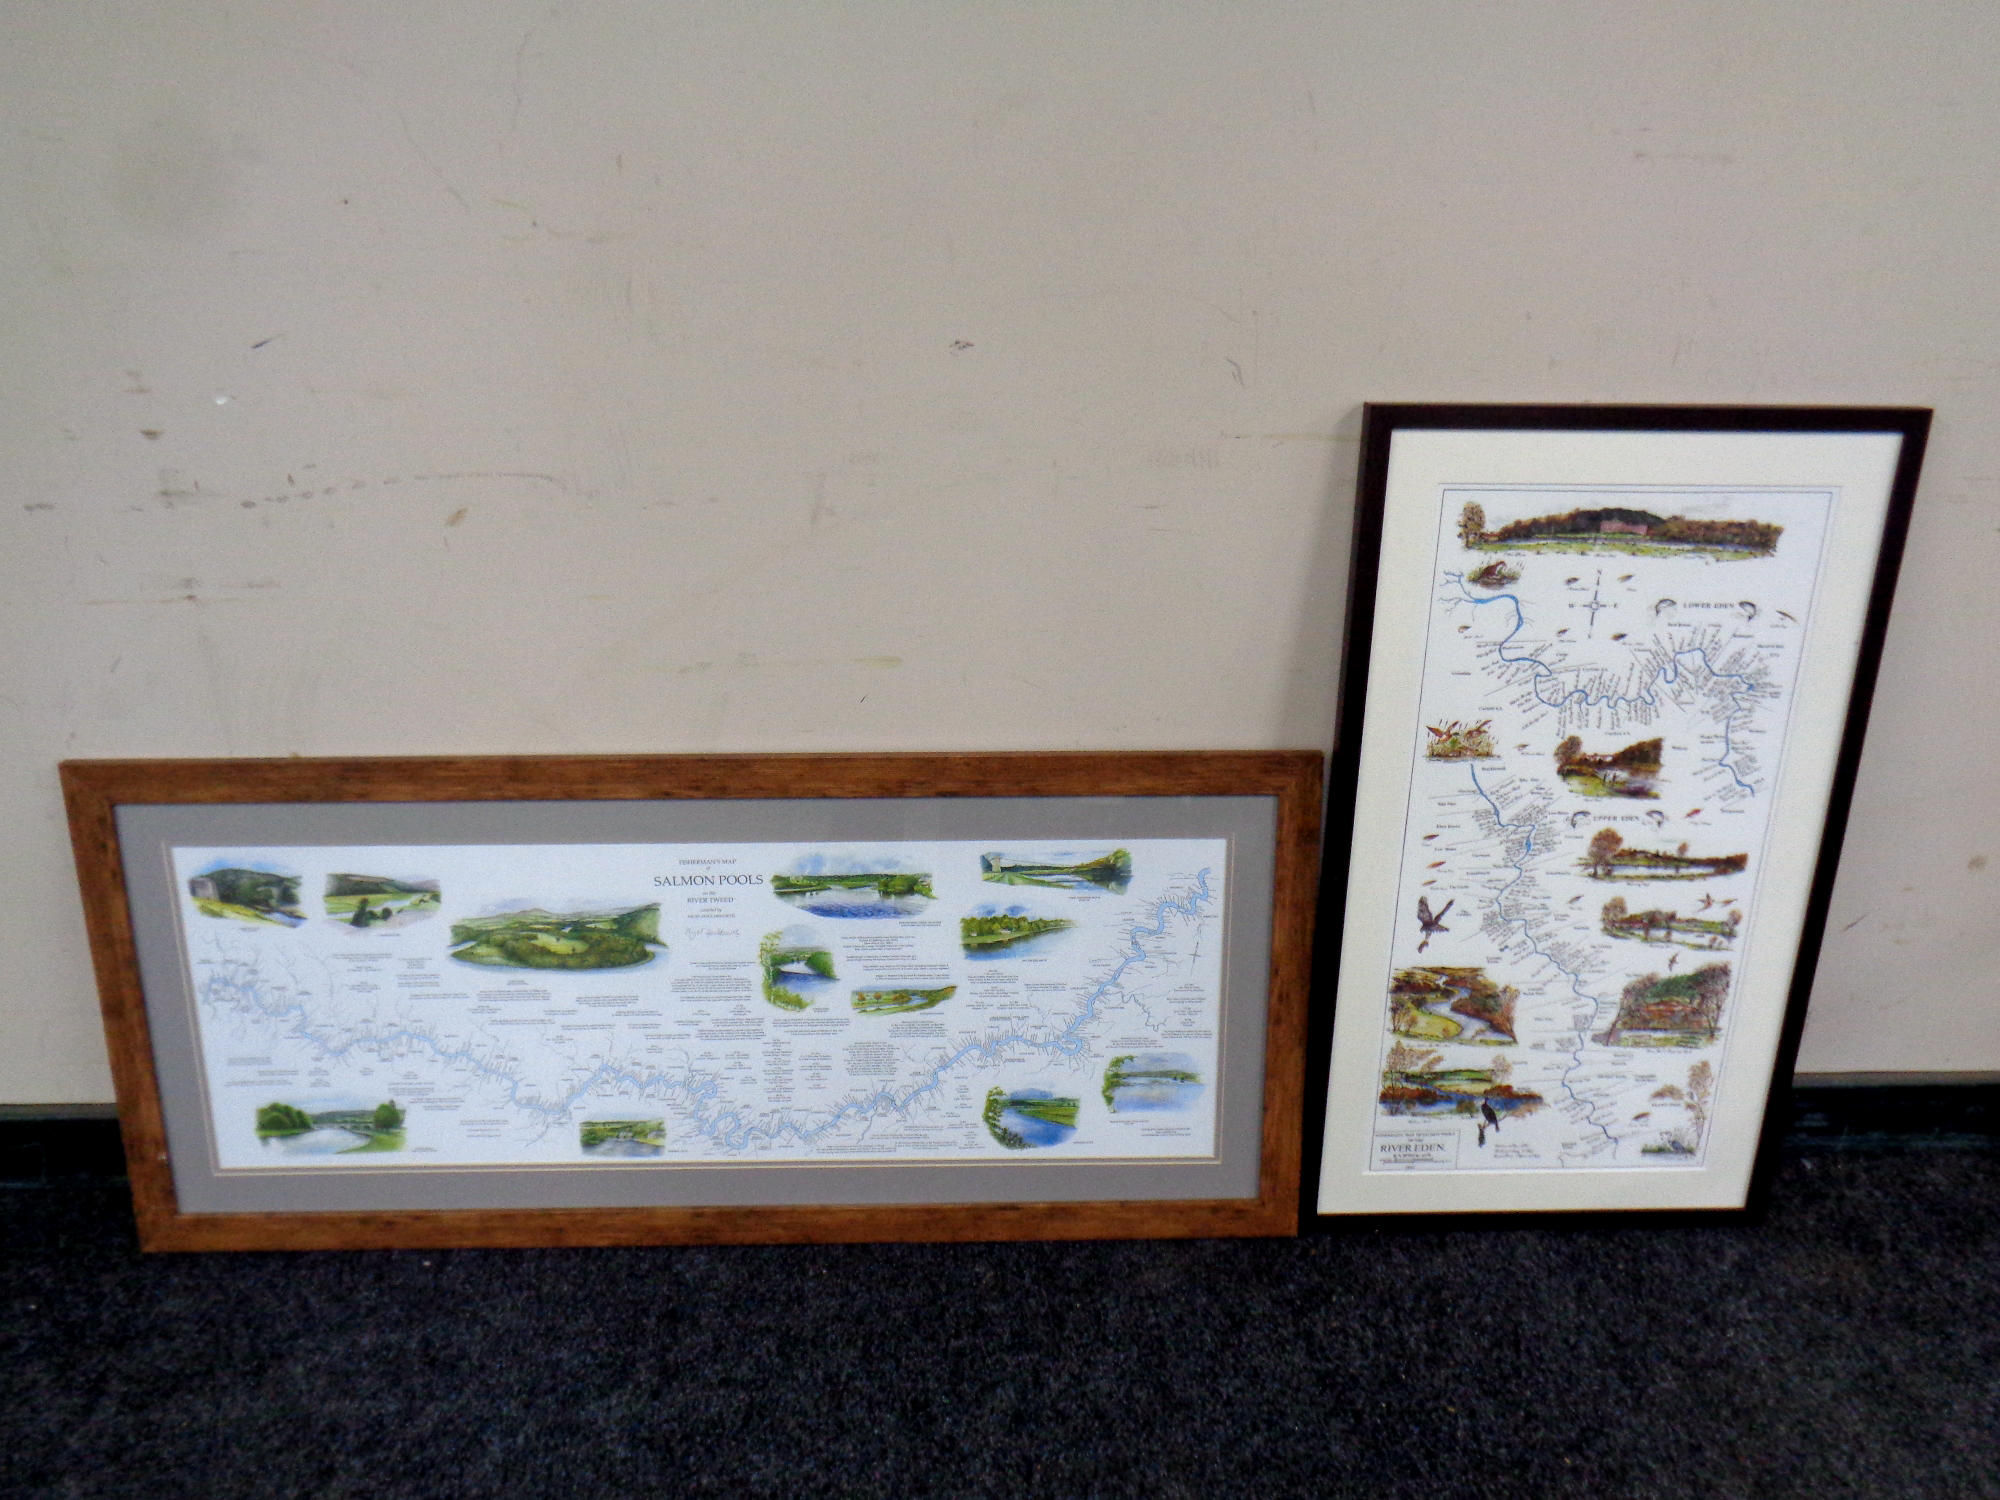 A fisherman's map and salmon pools on the River Tweed compiled by Nigel Houldsworth,